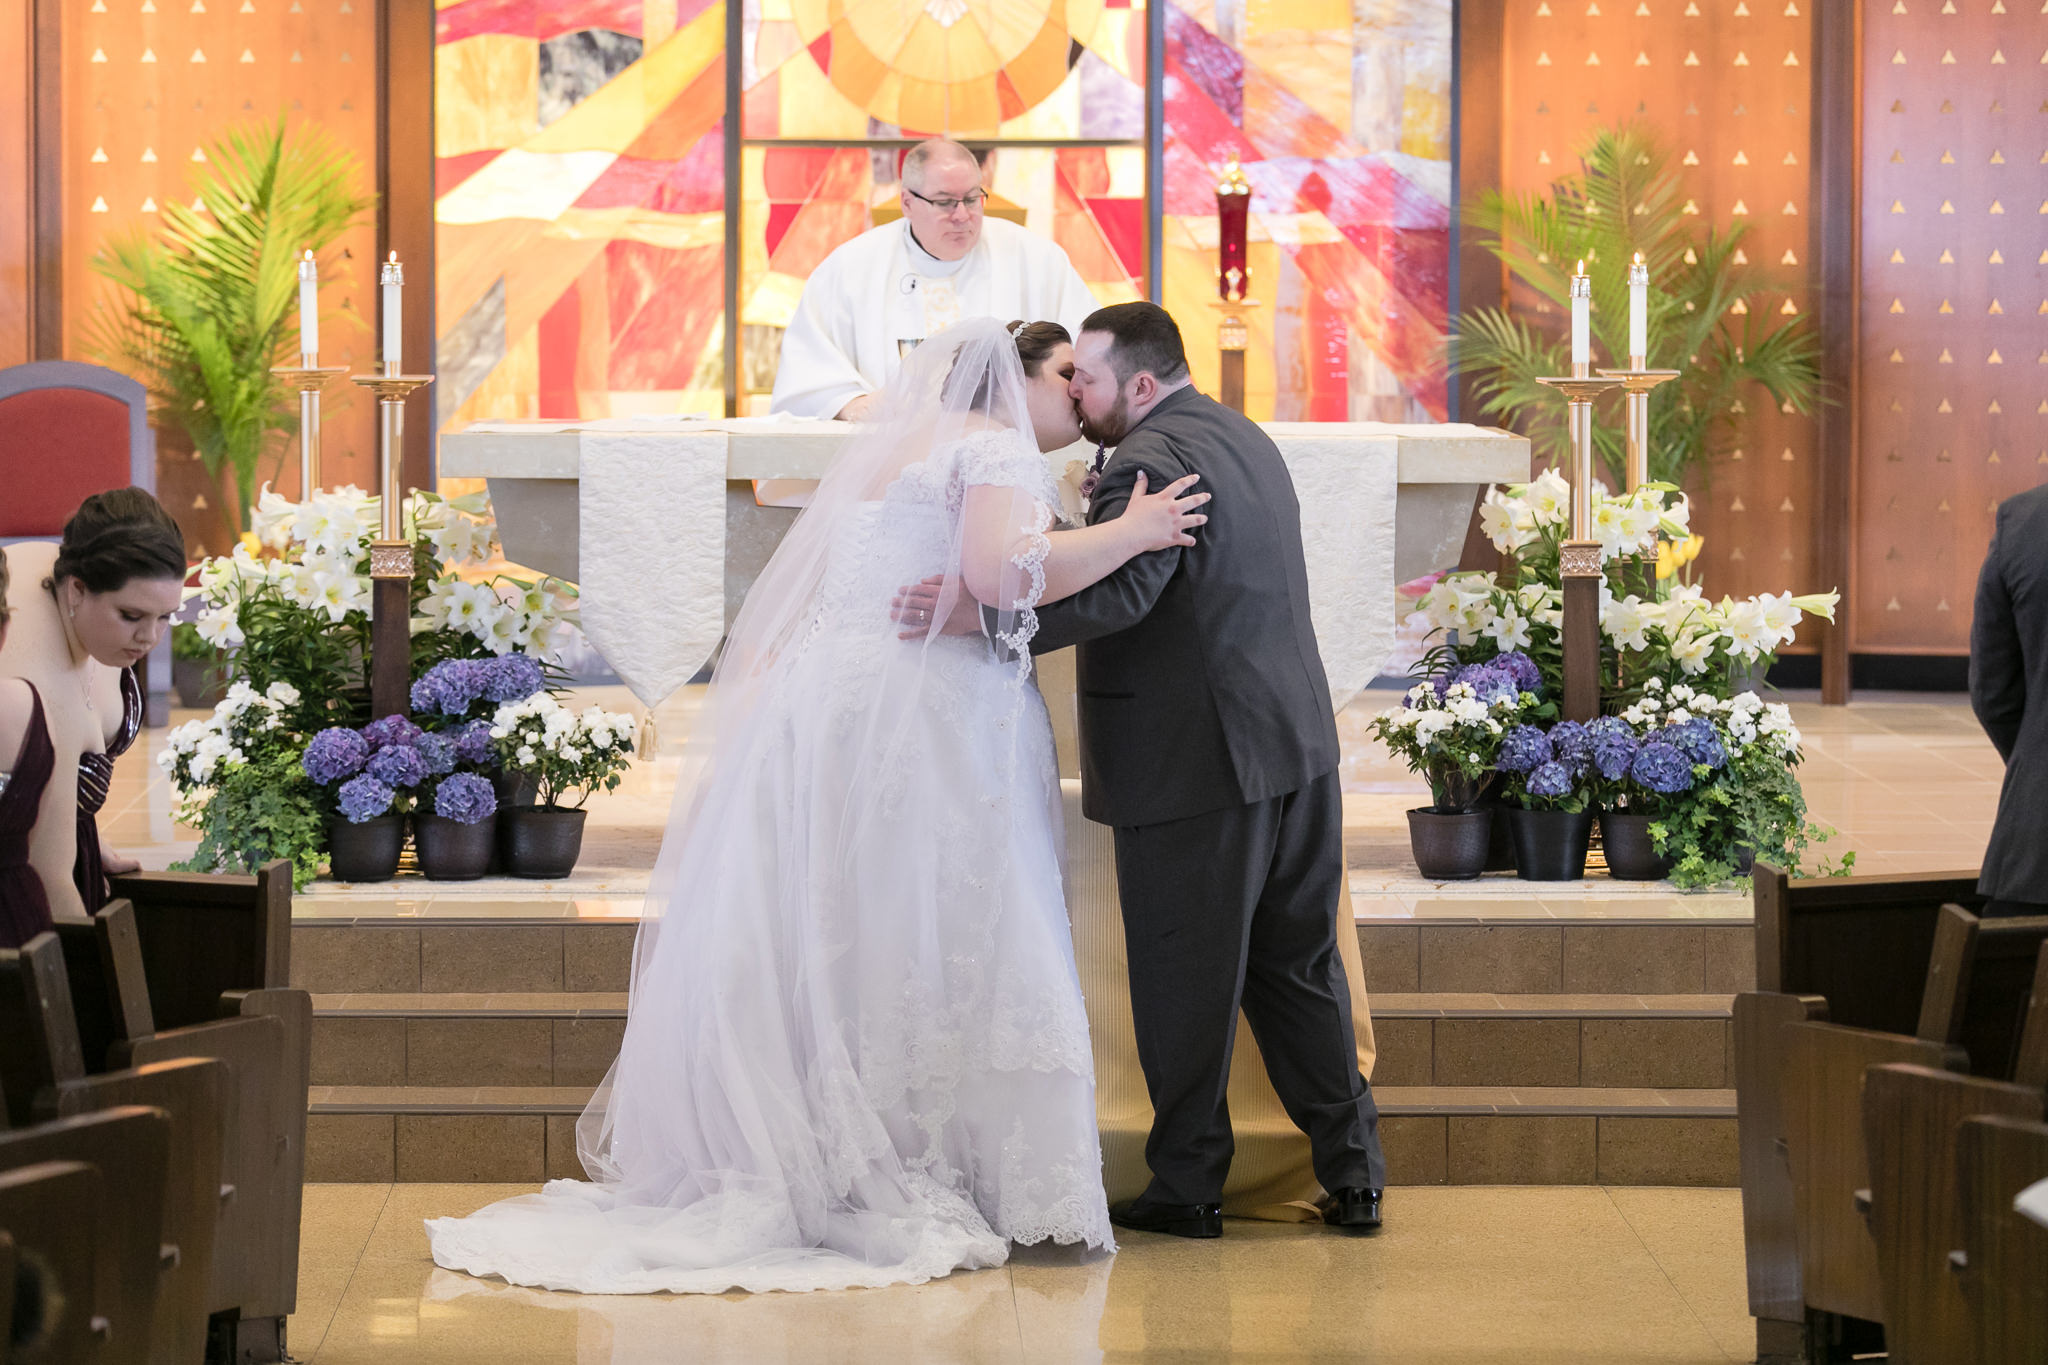 Bride & groom share a kiss during their wedding ceremony at Holy Trinity in Robinson Township